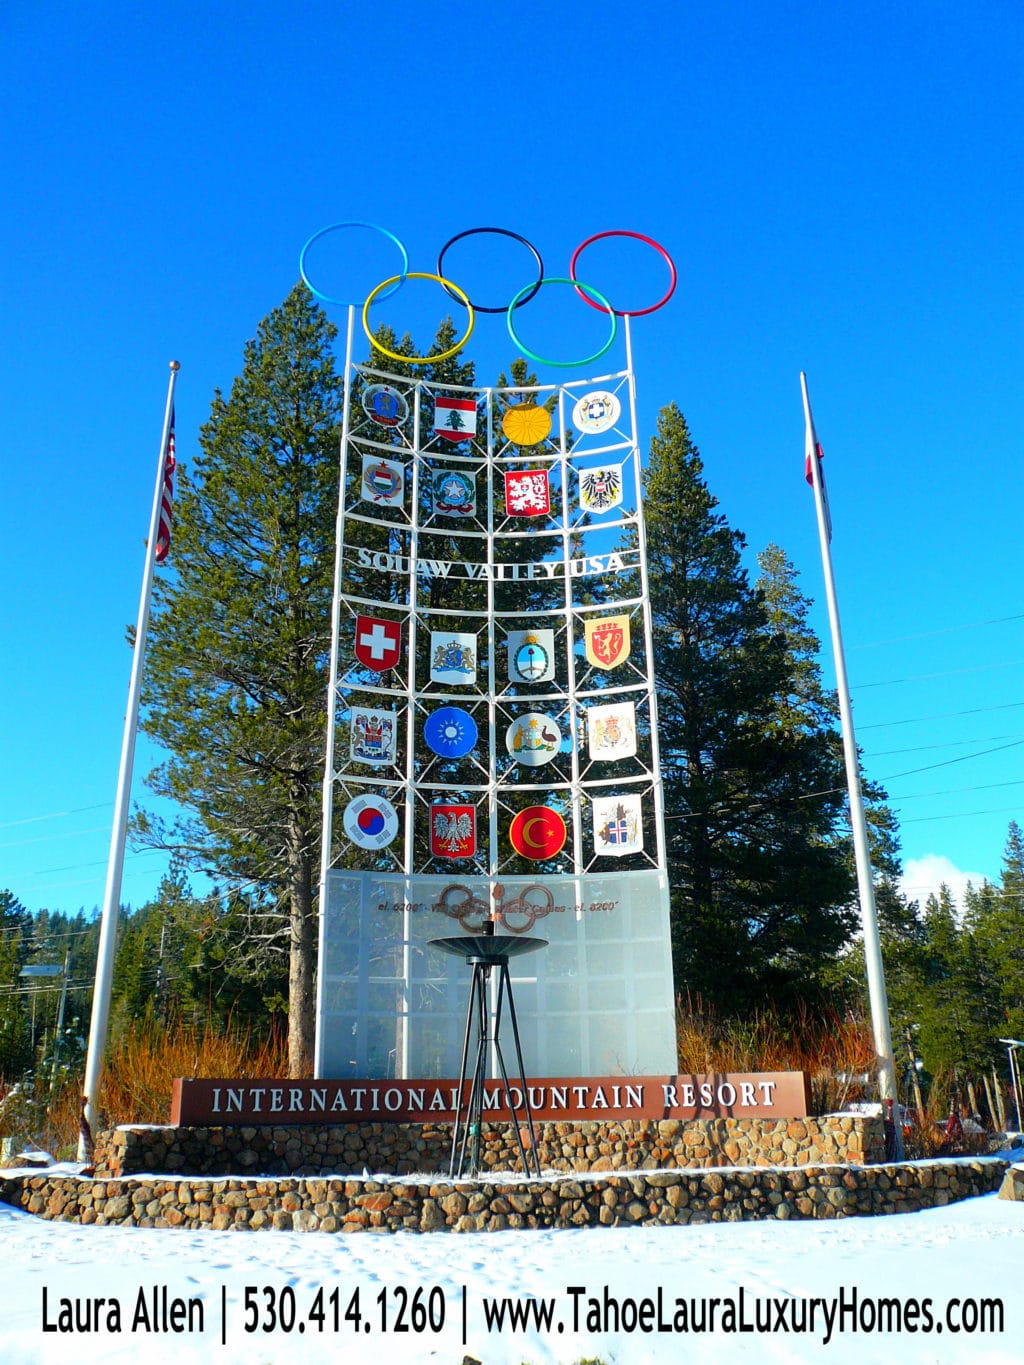 Entrance to Olympic Valley (Squaw Valley), California